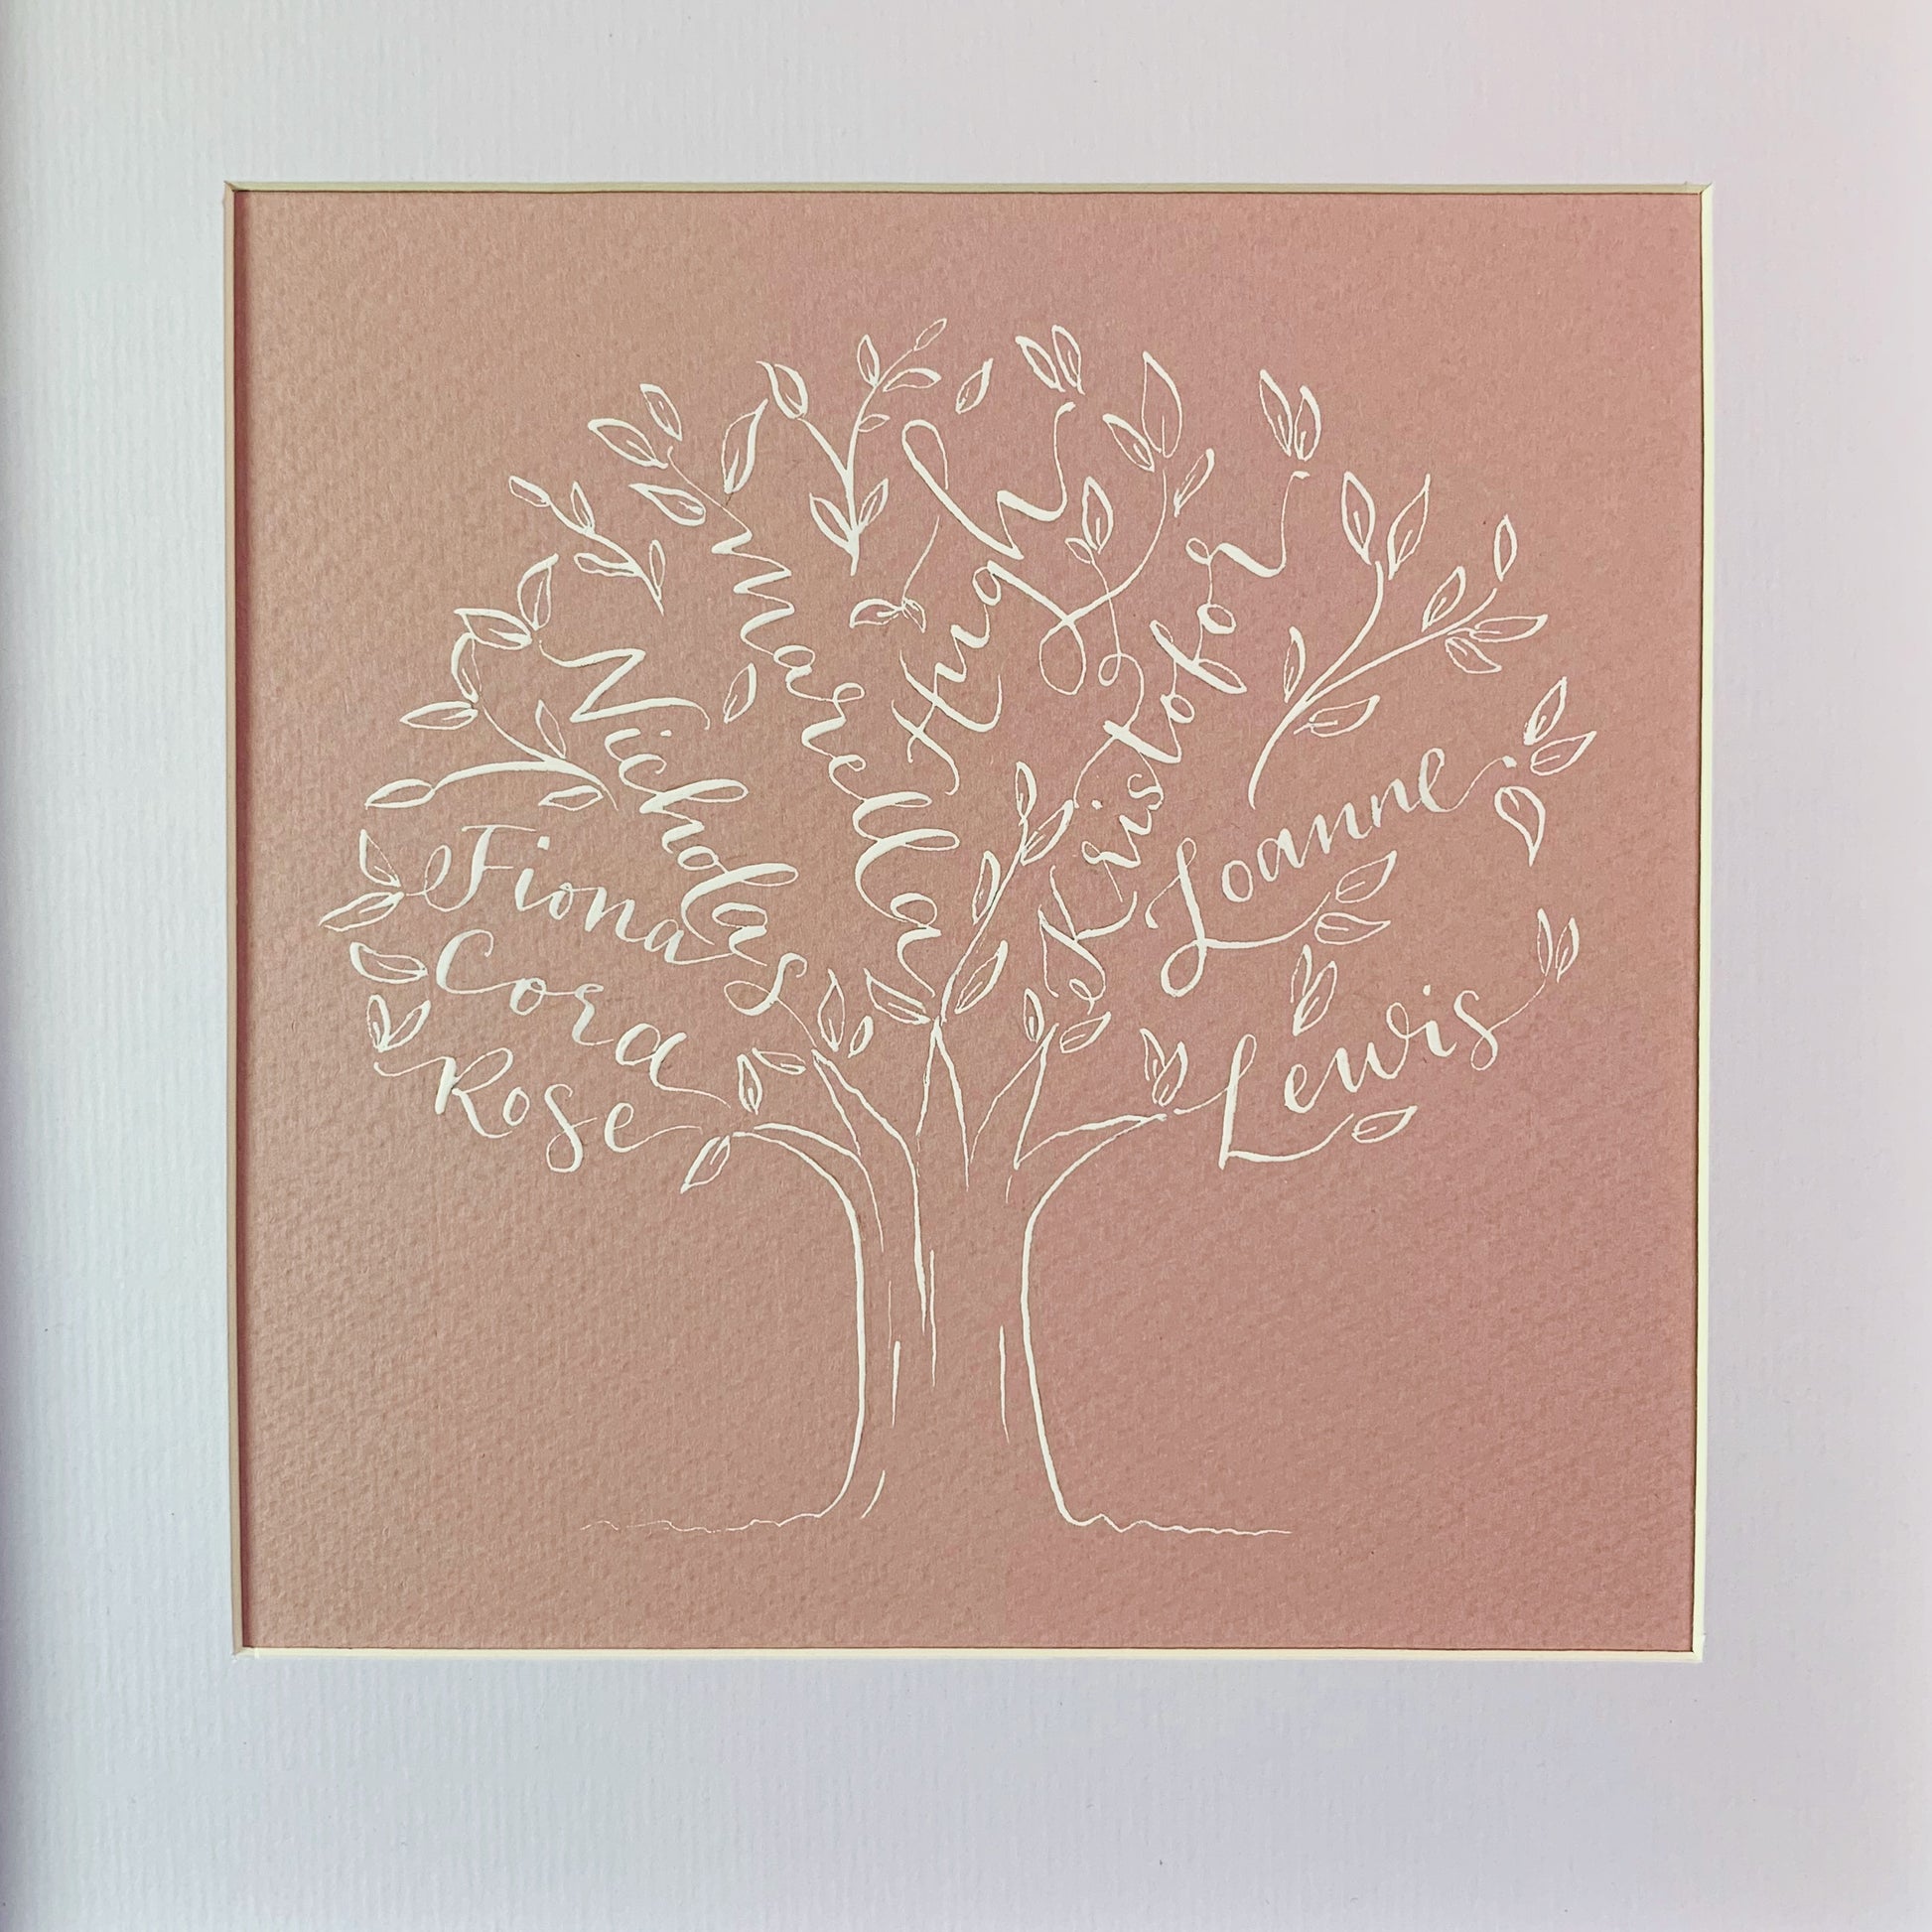 dusty pink paper within white mount, white ink calligraphy on dusty pink card making up family tree